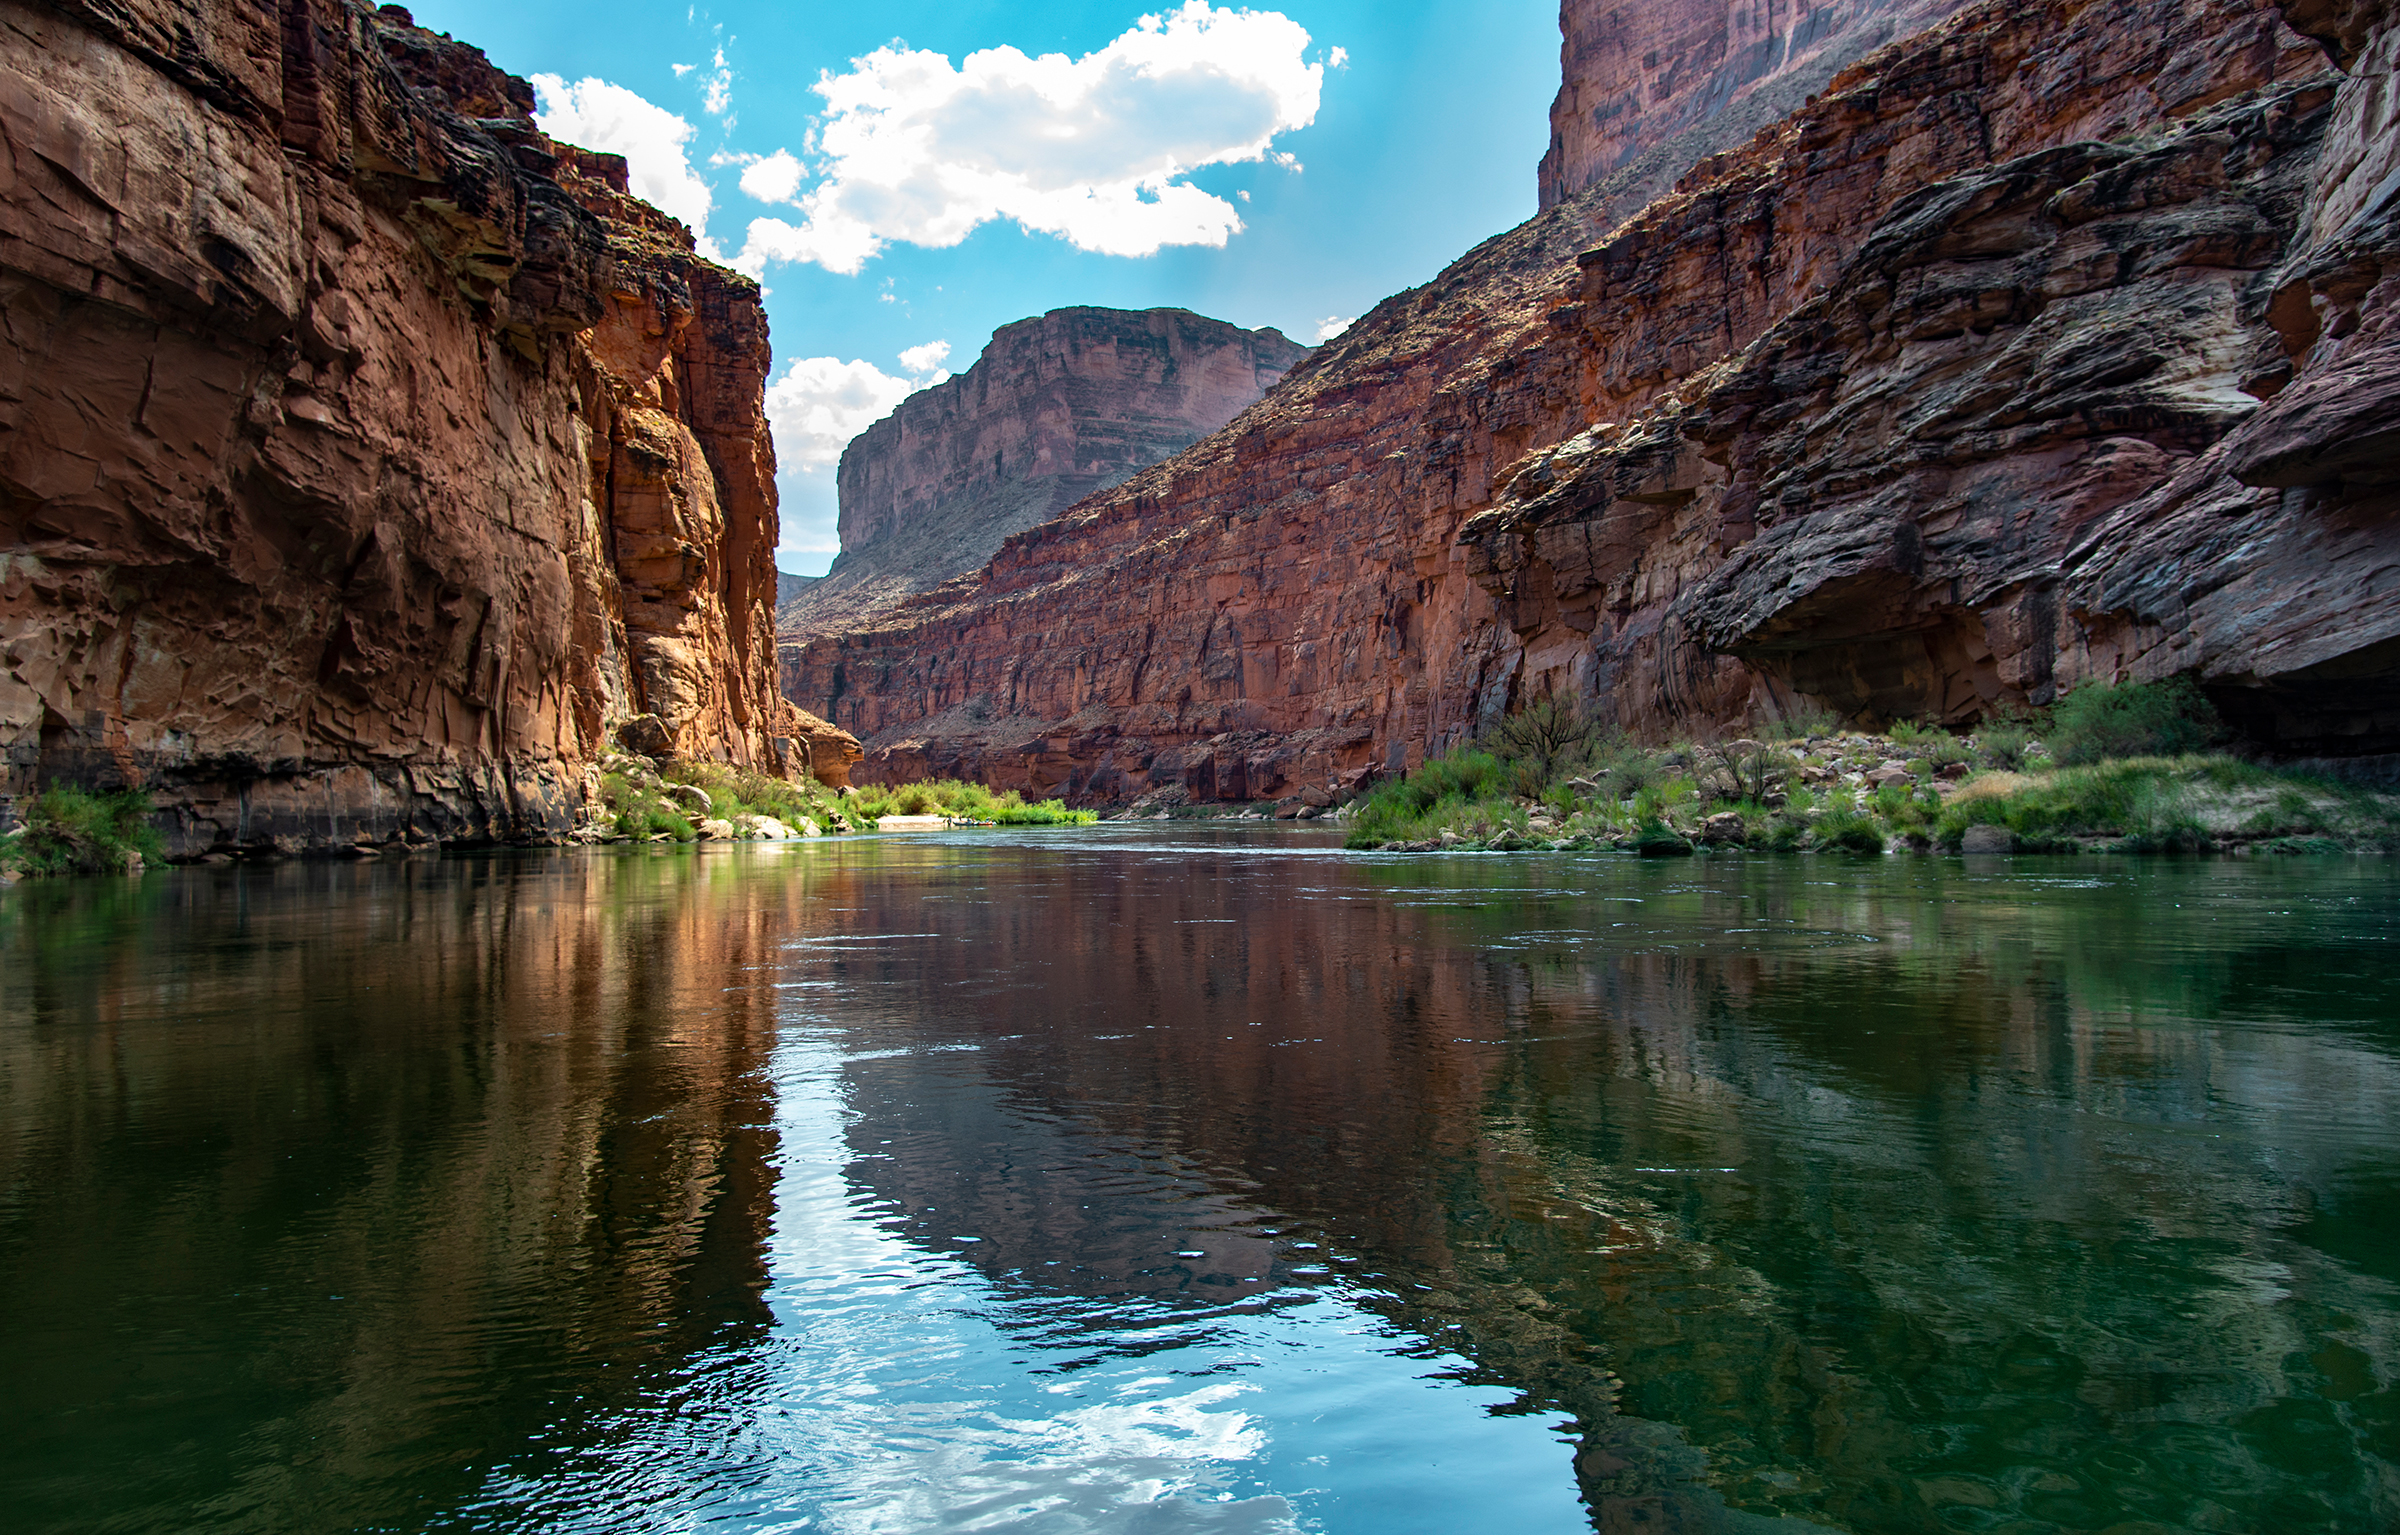 The Colorado River in Grand Canyon National Park